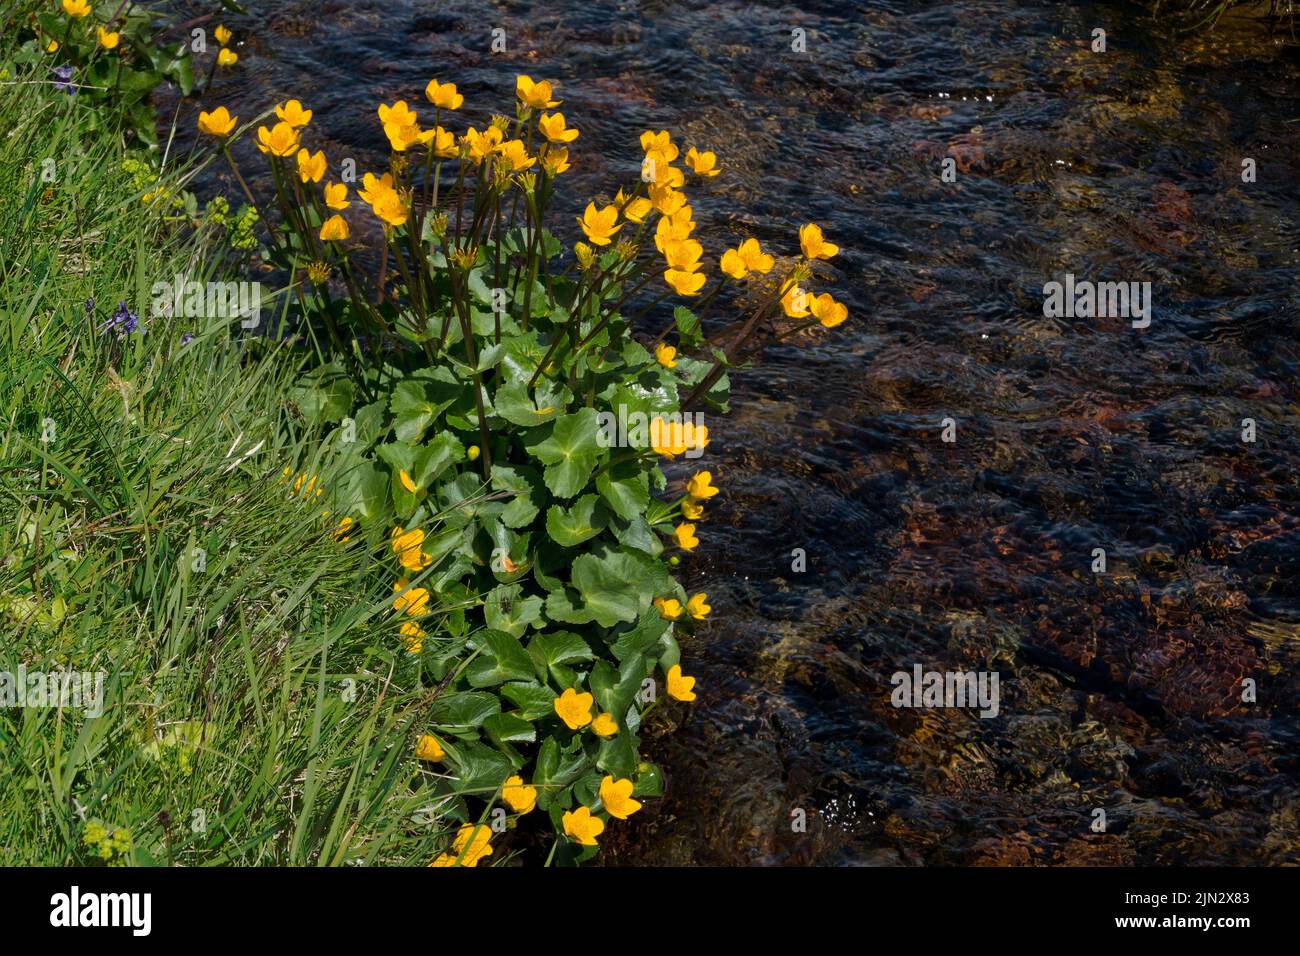 Marsh-marigold with yellow flowers in a grassy field along a calmly flowing mountain stream Stock Photo